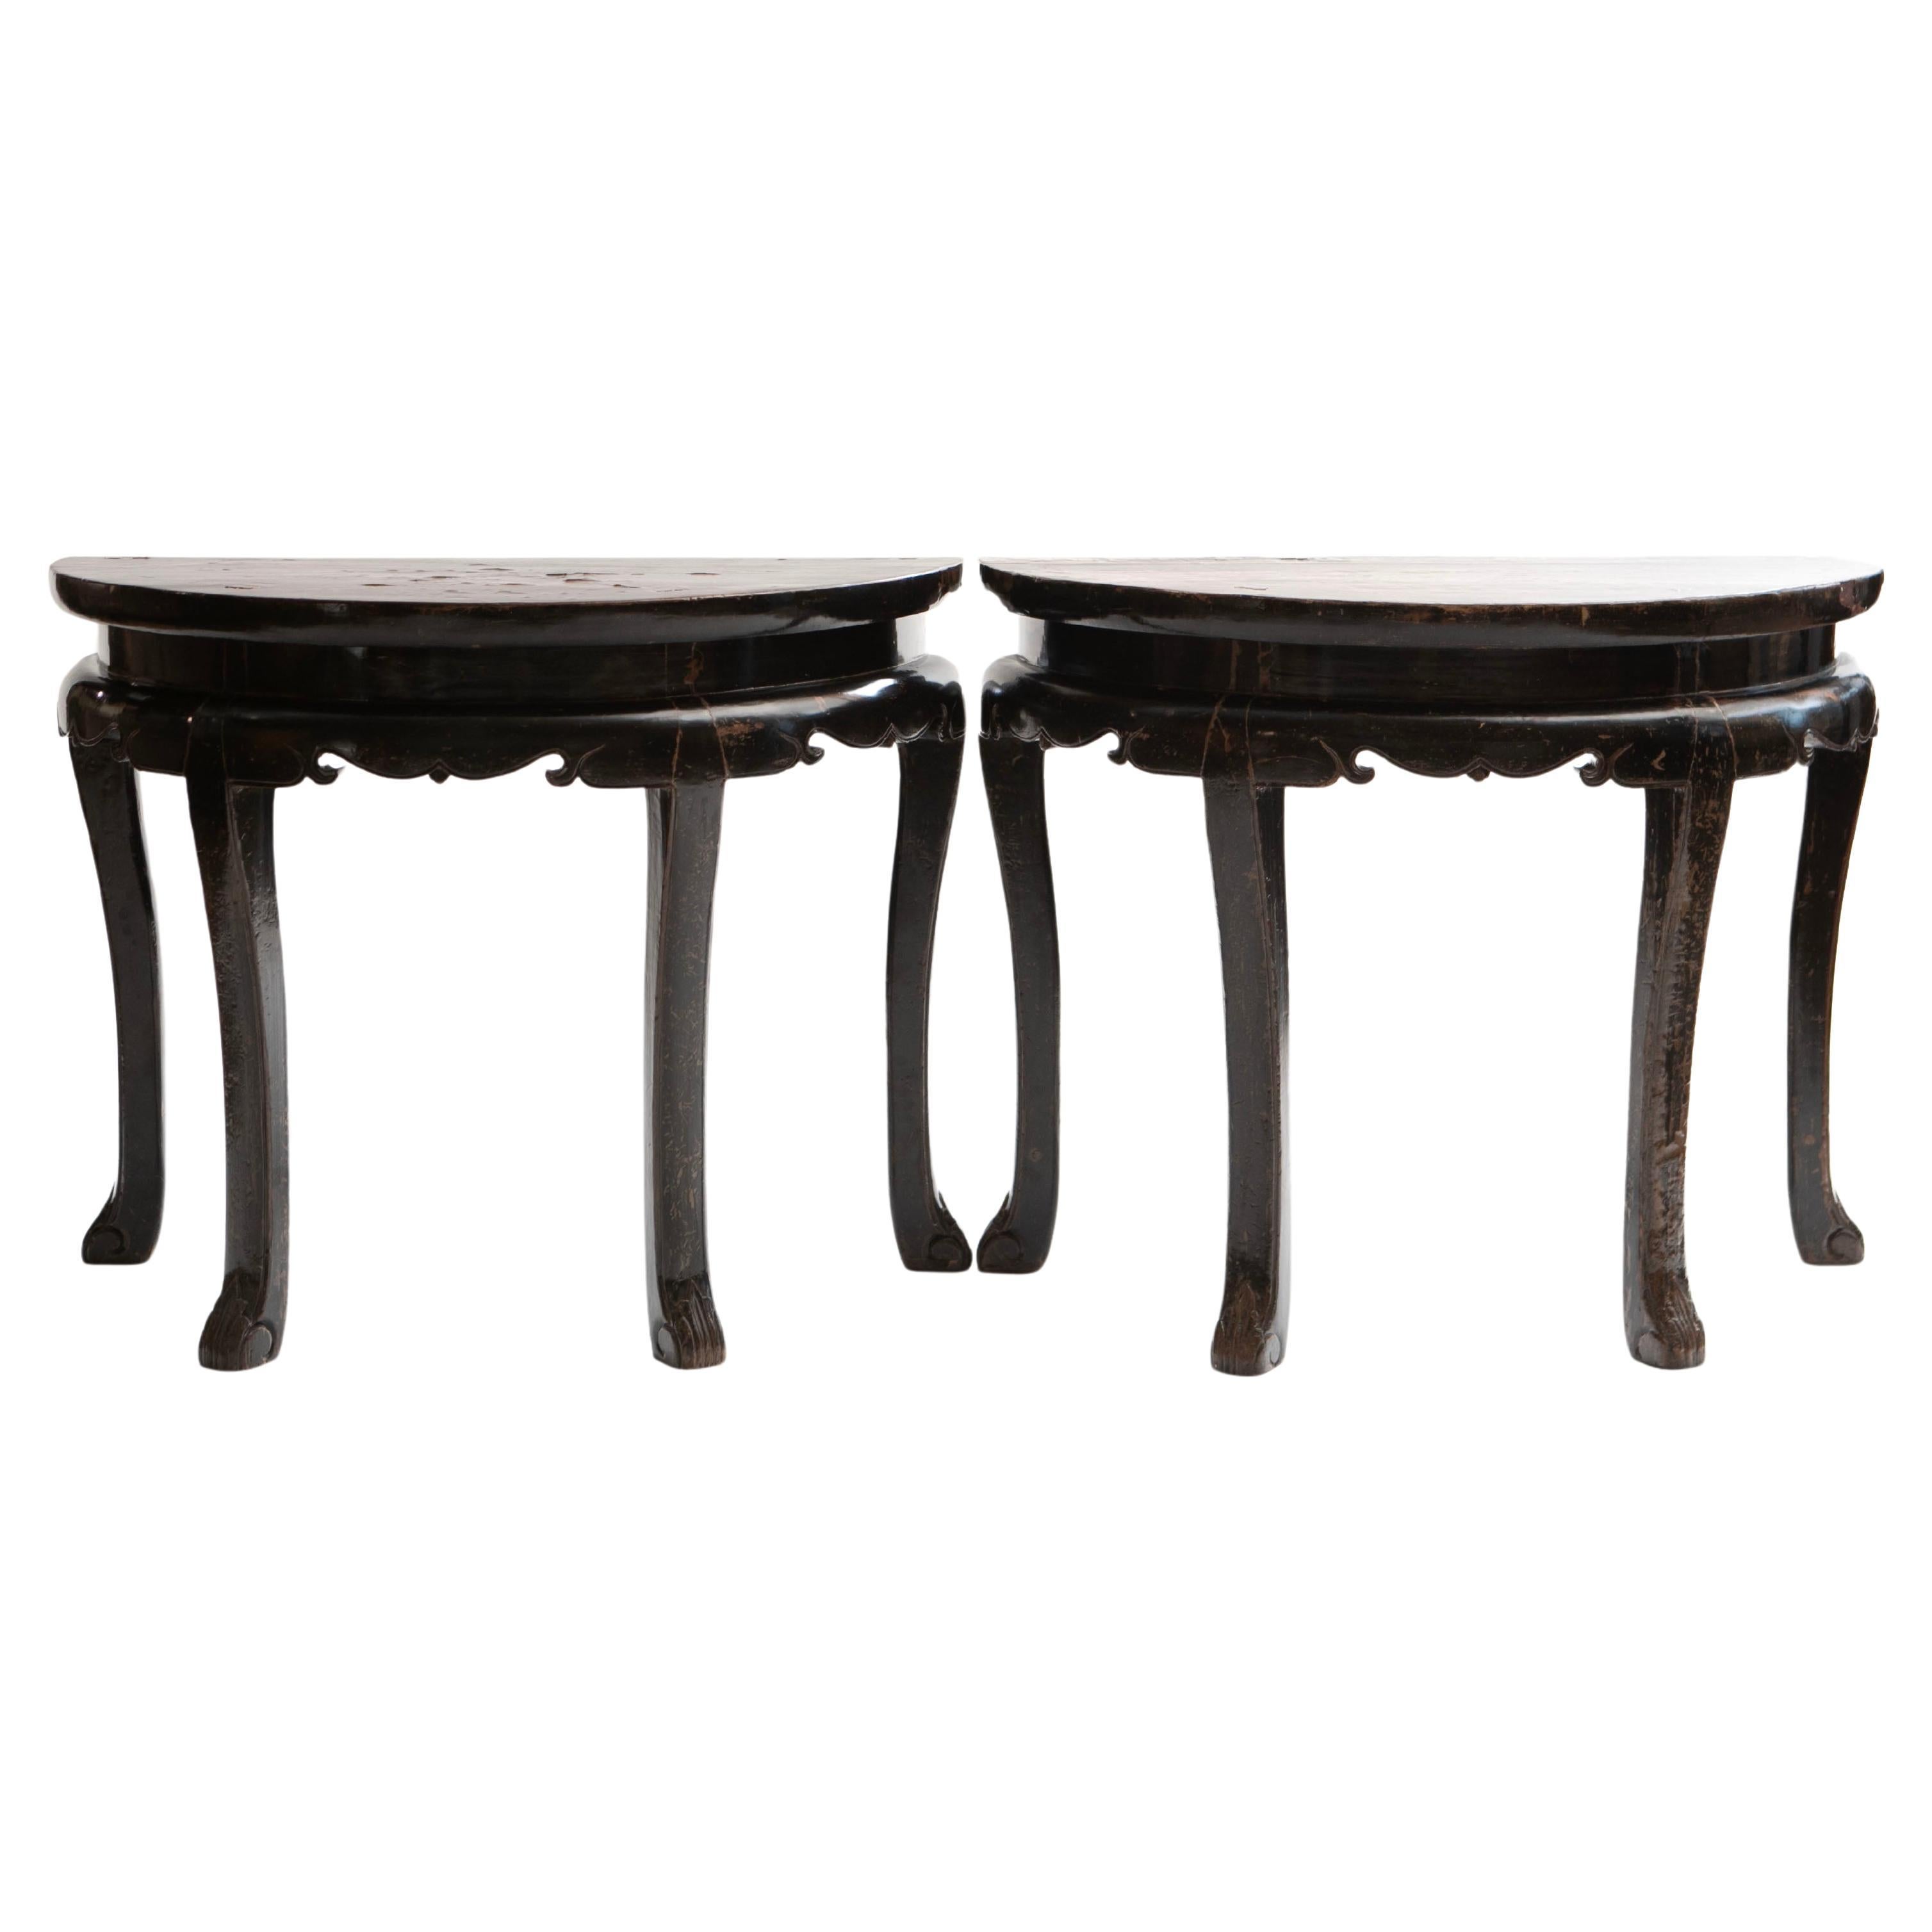 Pair of Qing Dynasty Lacquered Demilune Console Tables ore center Table